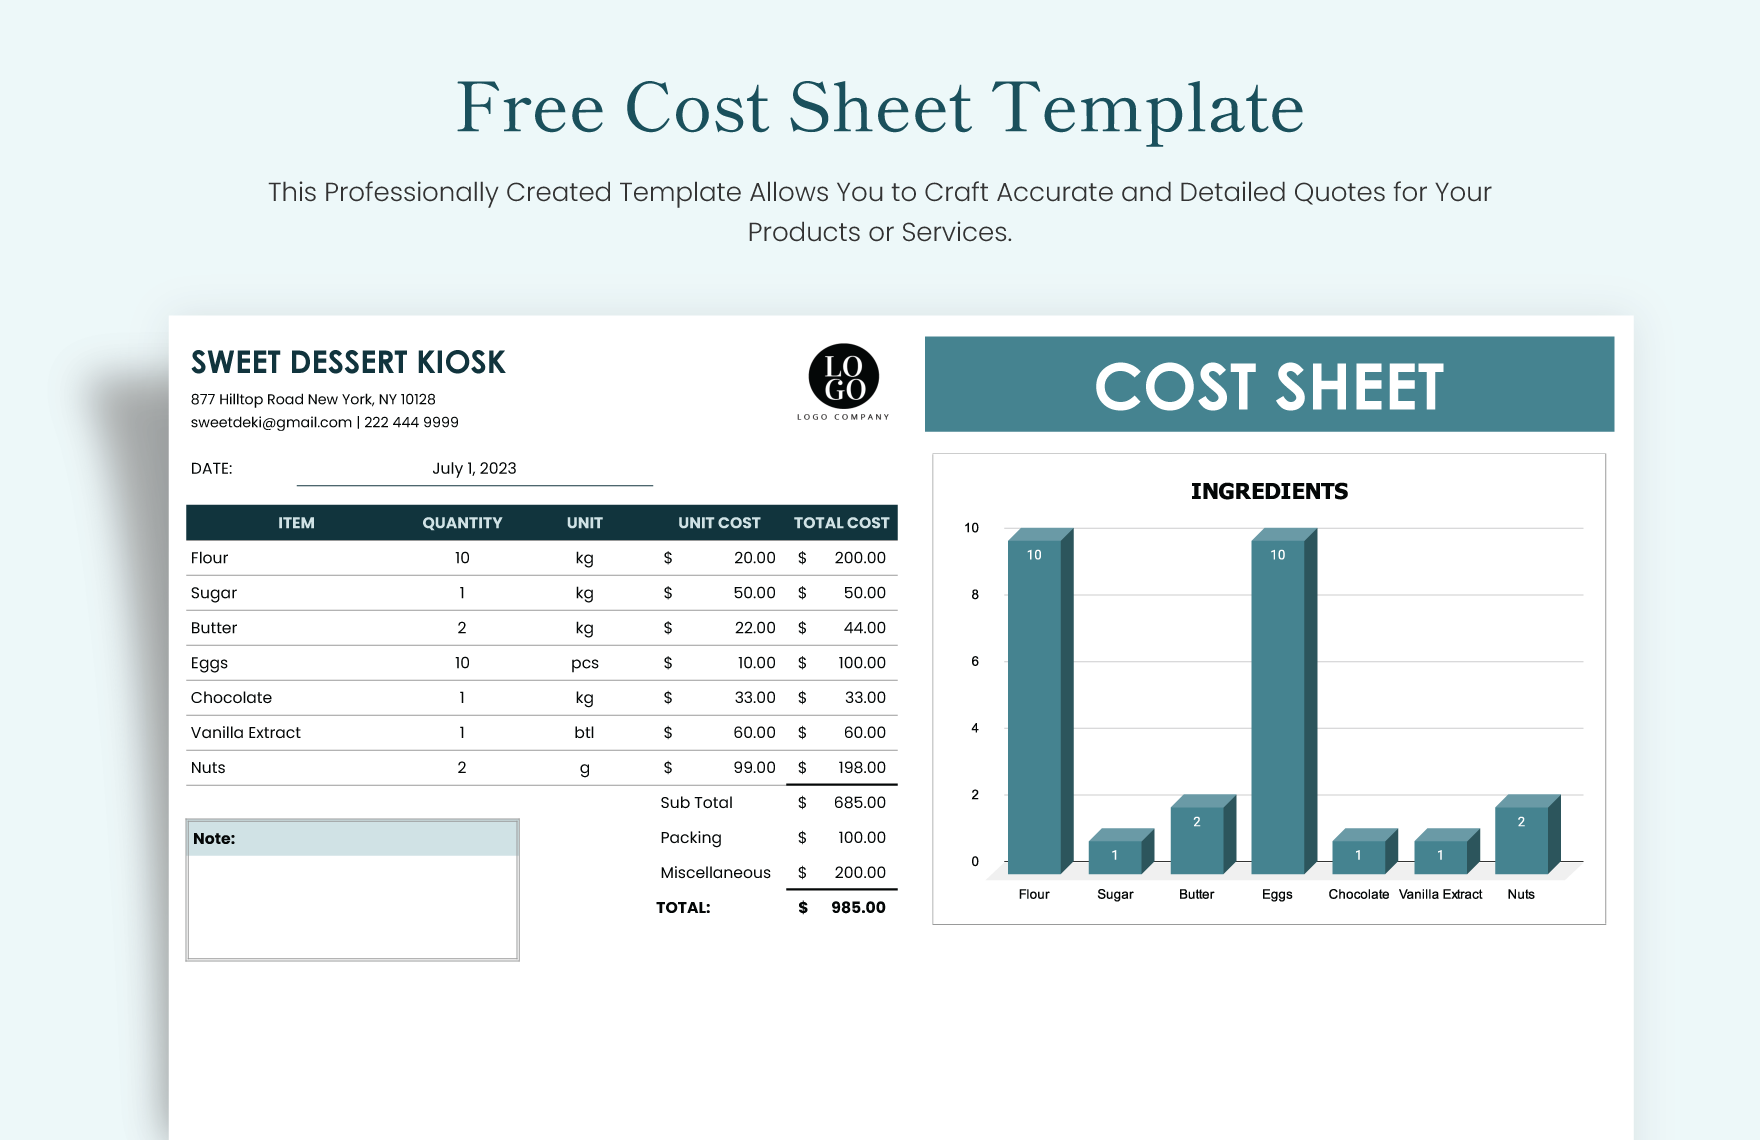 Free Cost Sheet Template in Excel, Google Sheets